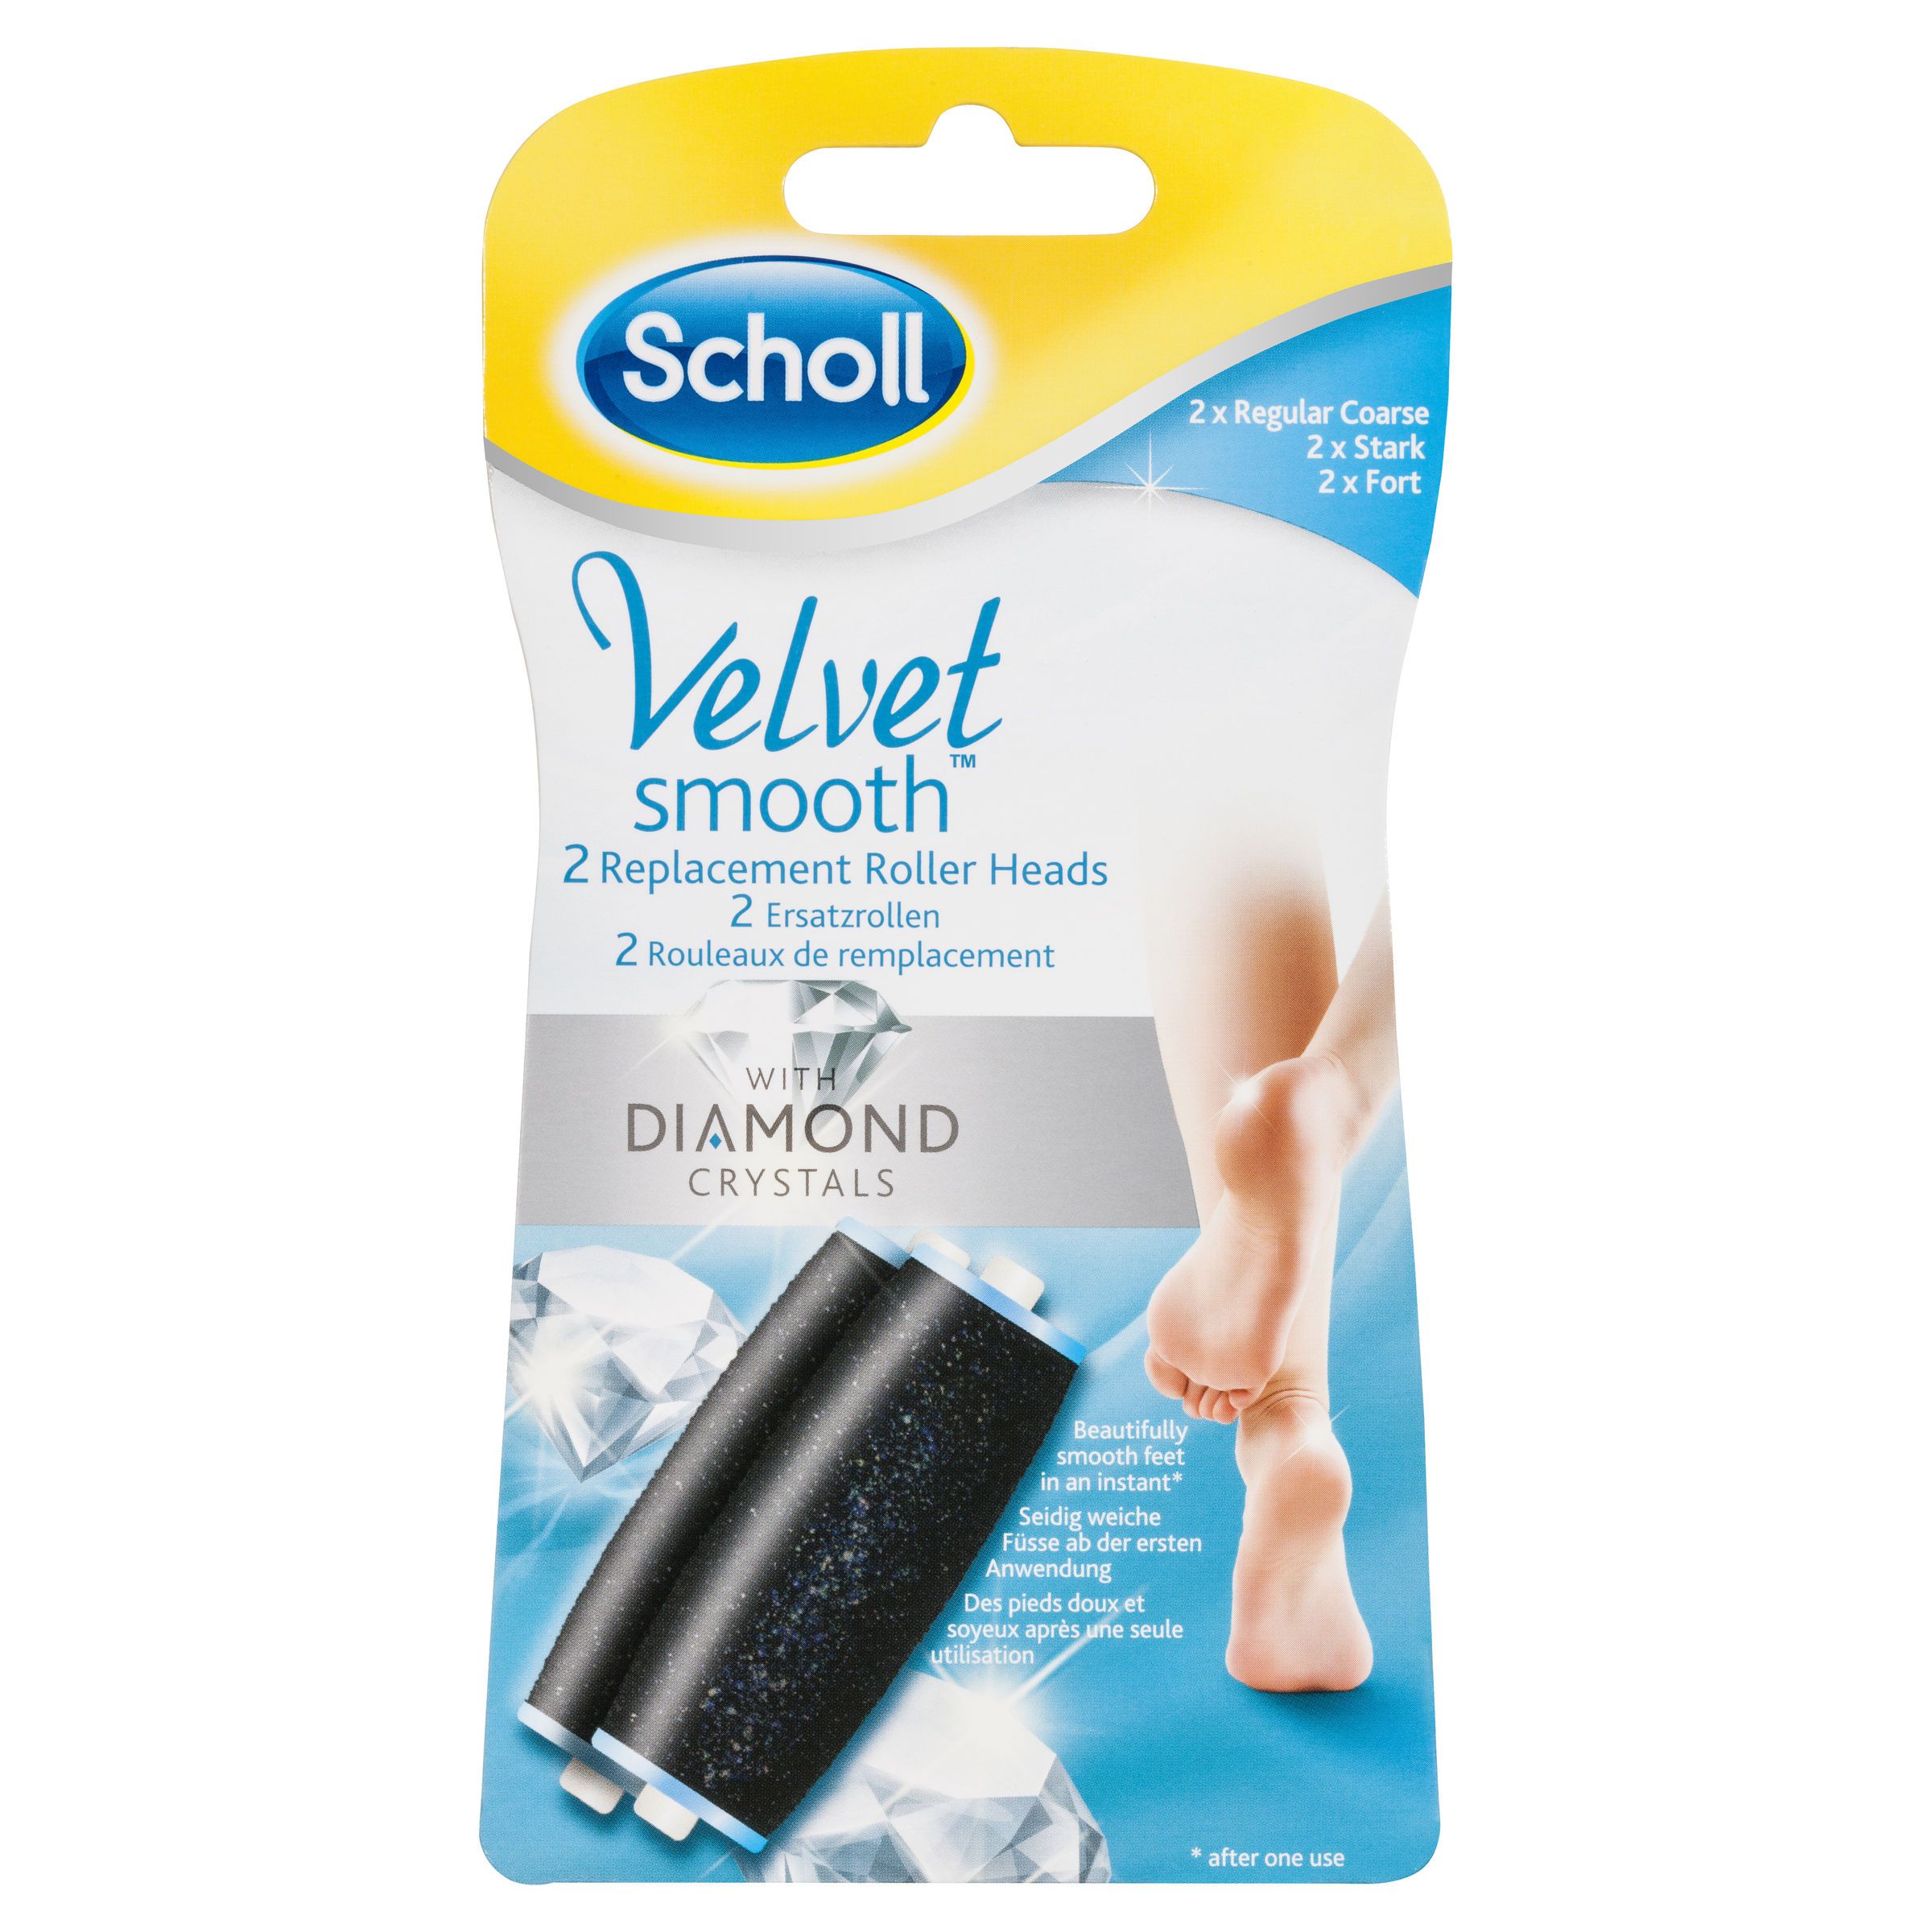 All Footcare Products | Scholl AU